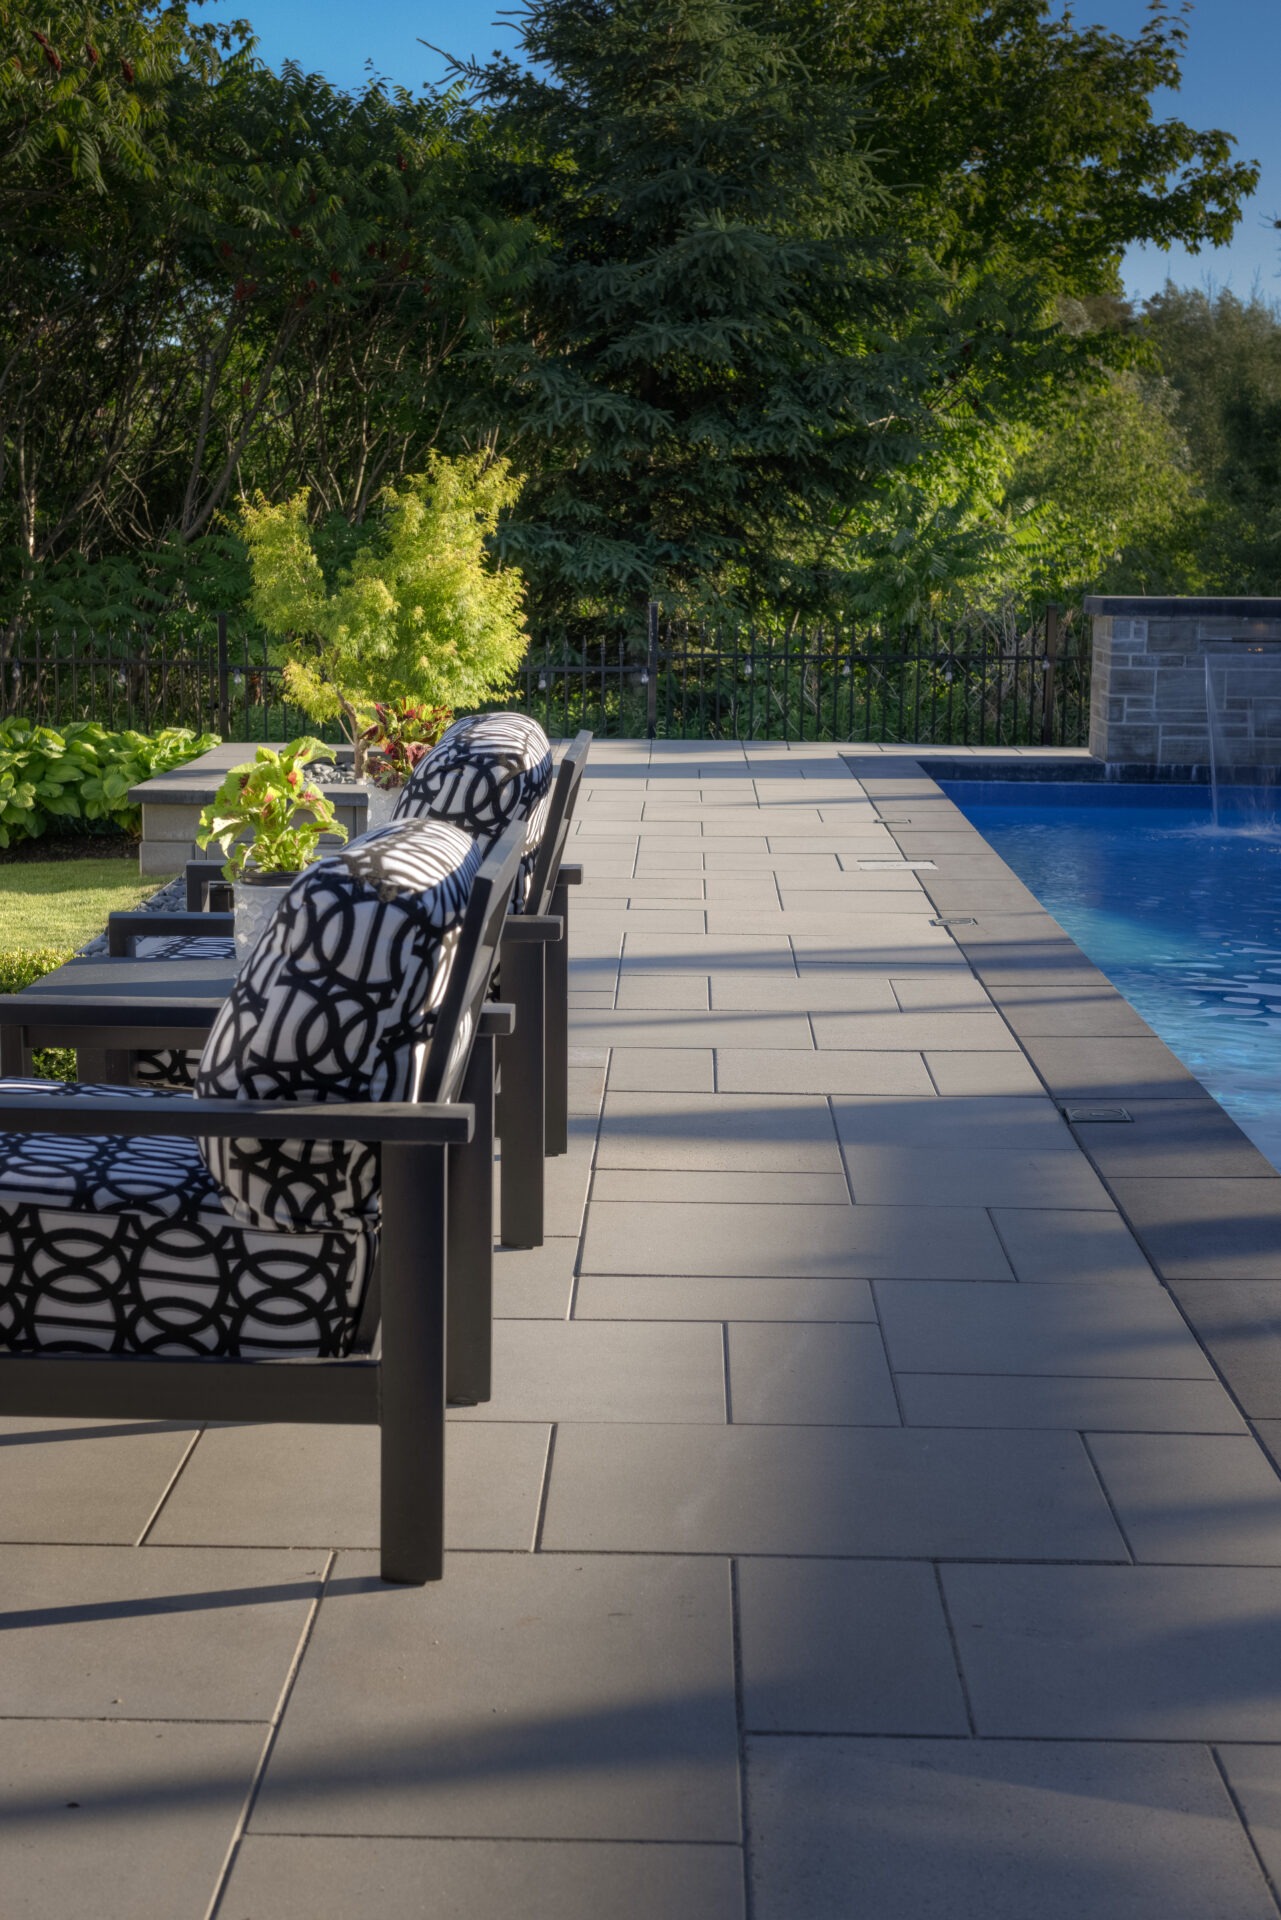 An outdoor poolside area featuring a row of loungers with patterned cushions, a neatly tiled deck, lush greenery, clear skies, and a tranquil setting.